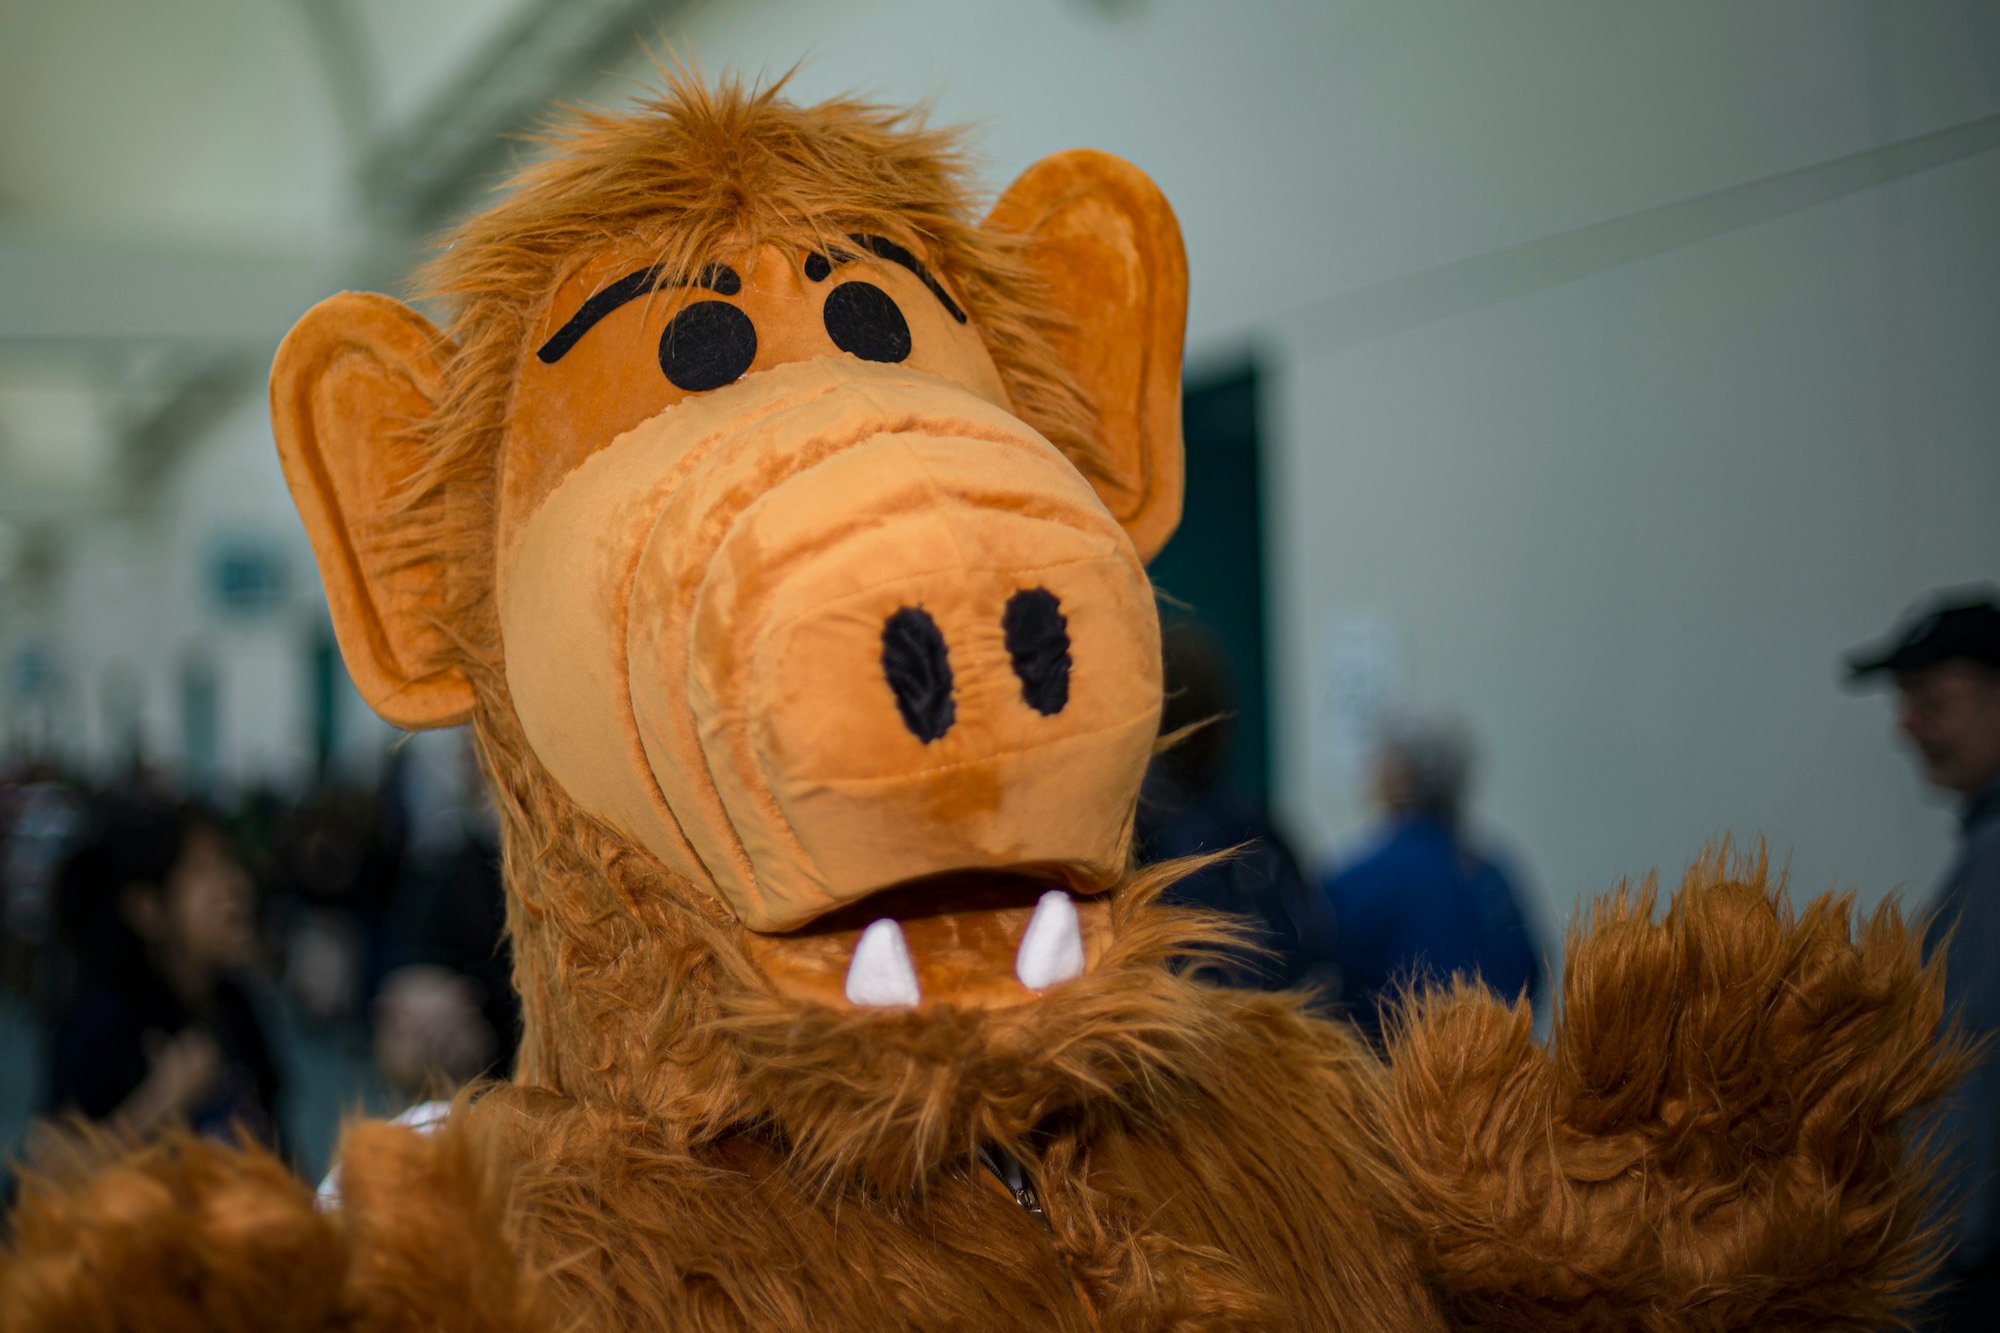 Alf stuffed animal in front of a blurred background